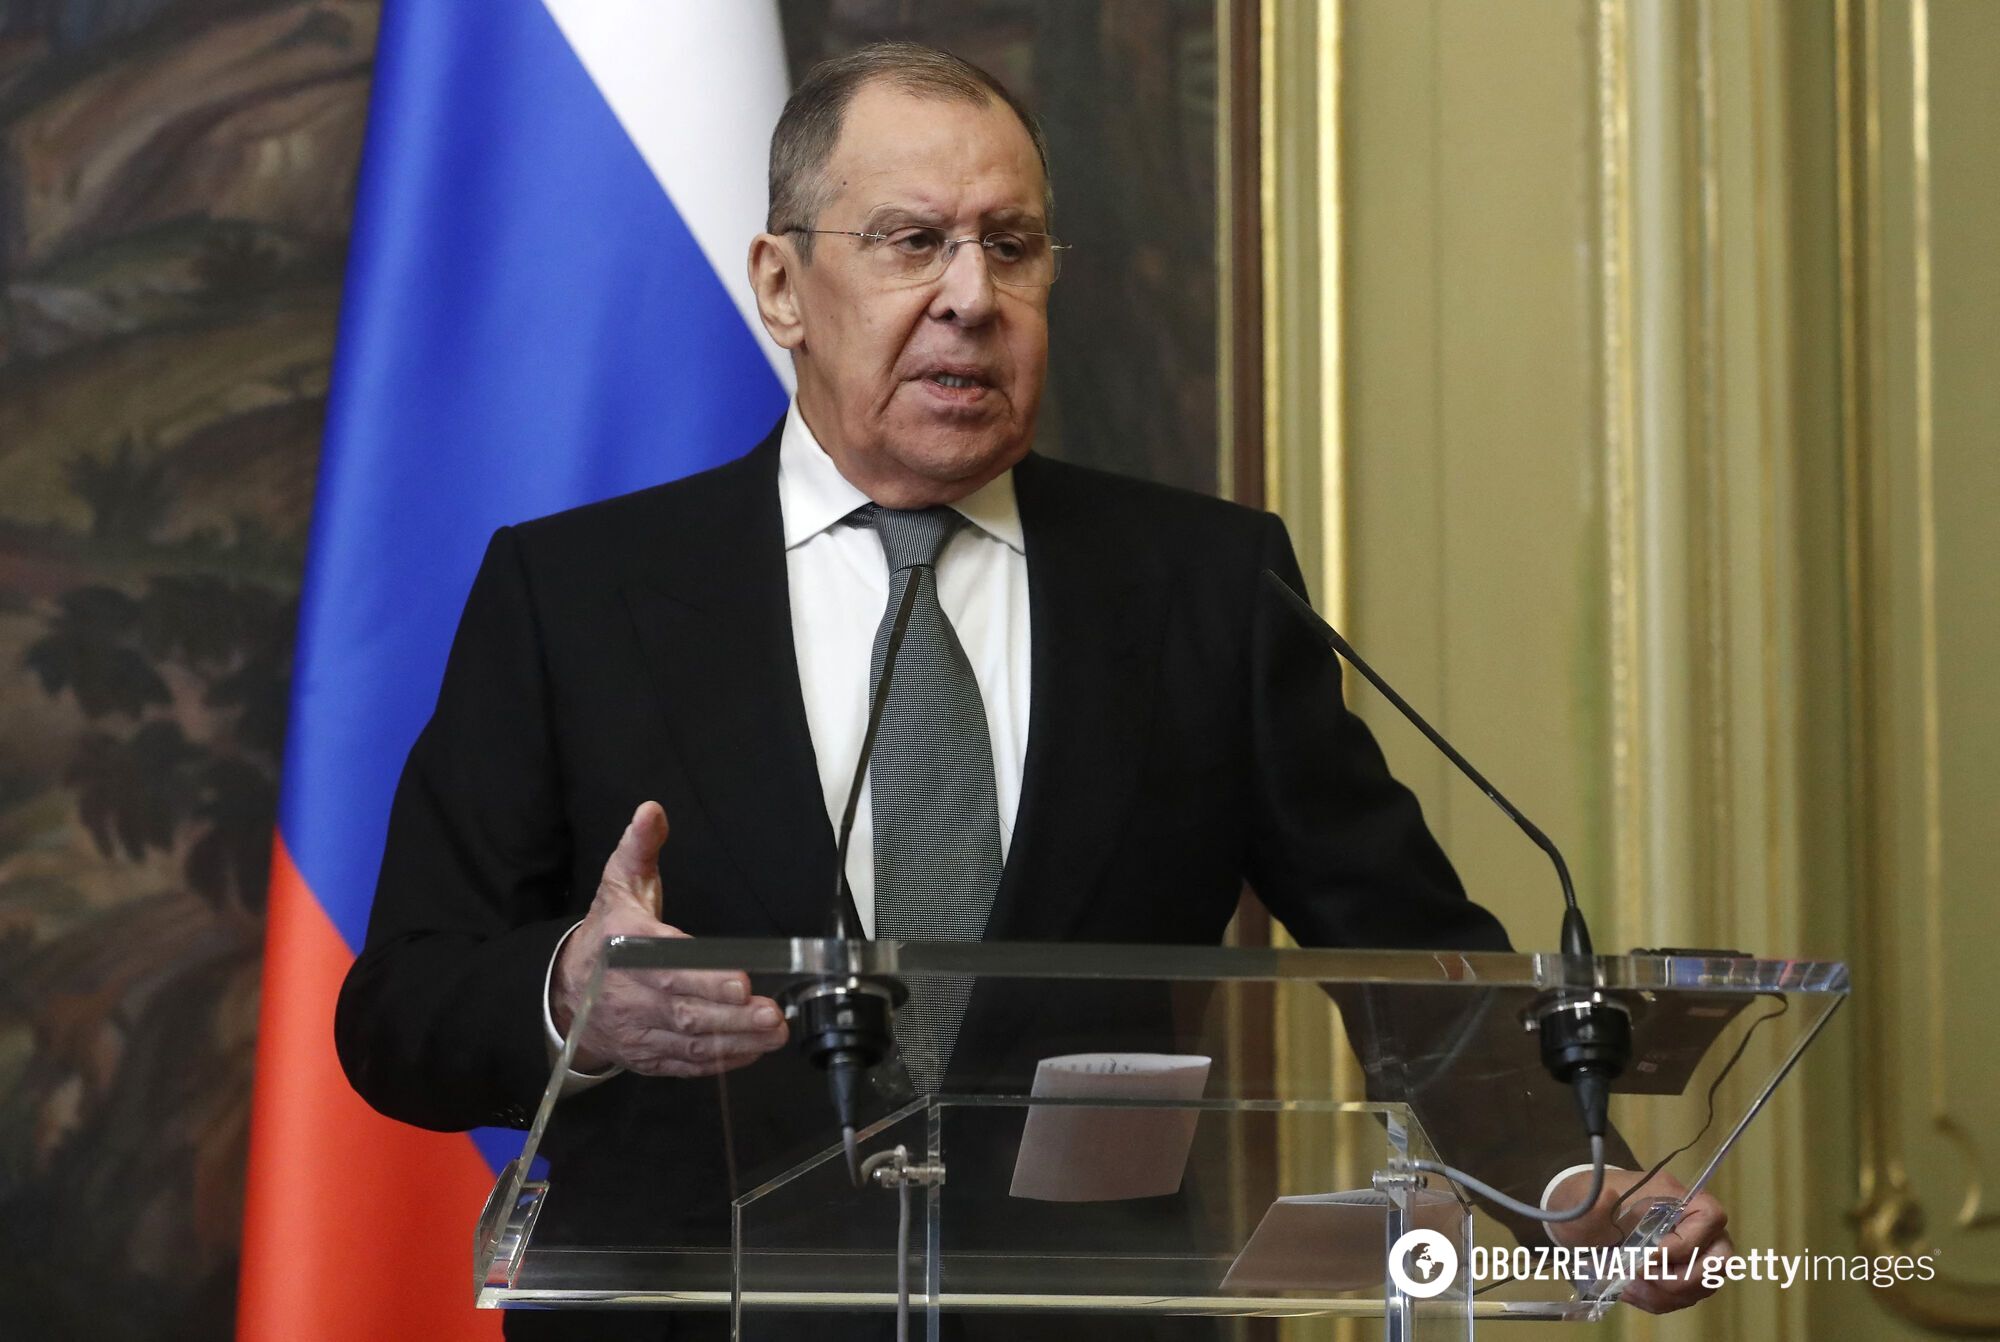 ''They are the ones who invaded Ukraine'': IOC nicely puts Lavrov in his place after whining about 'betrayal'